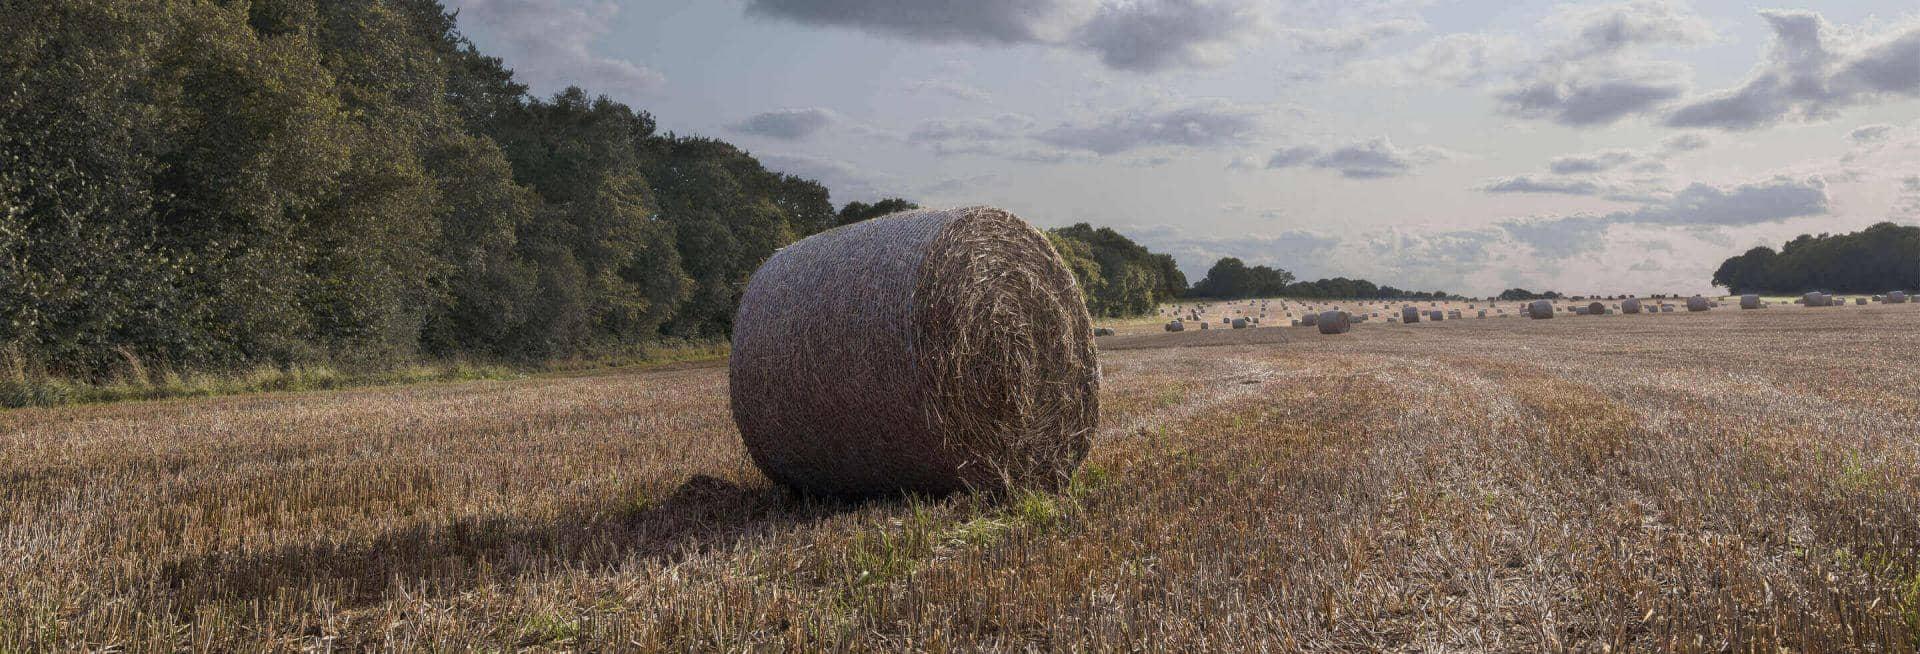 A field surrounded with trees, clouds in the sky and a bale of hay sitting in the centre.